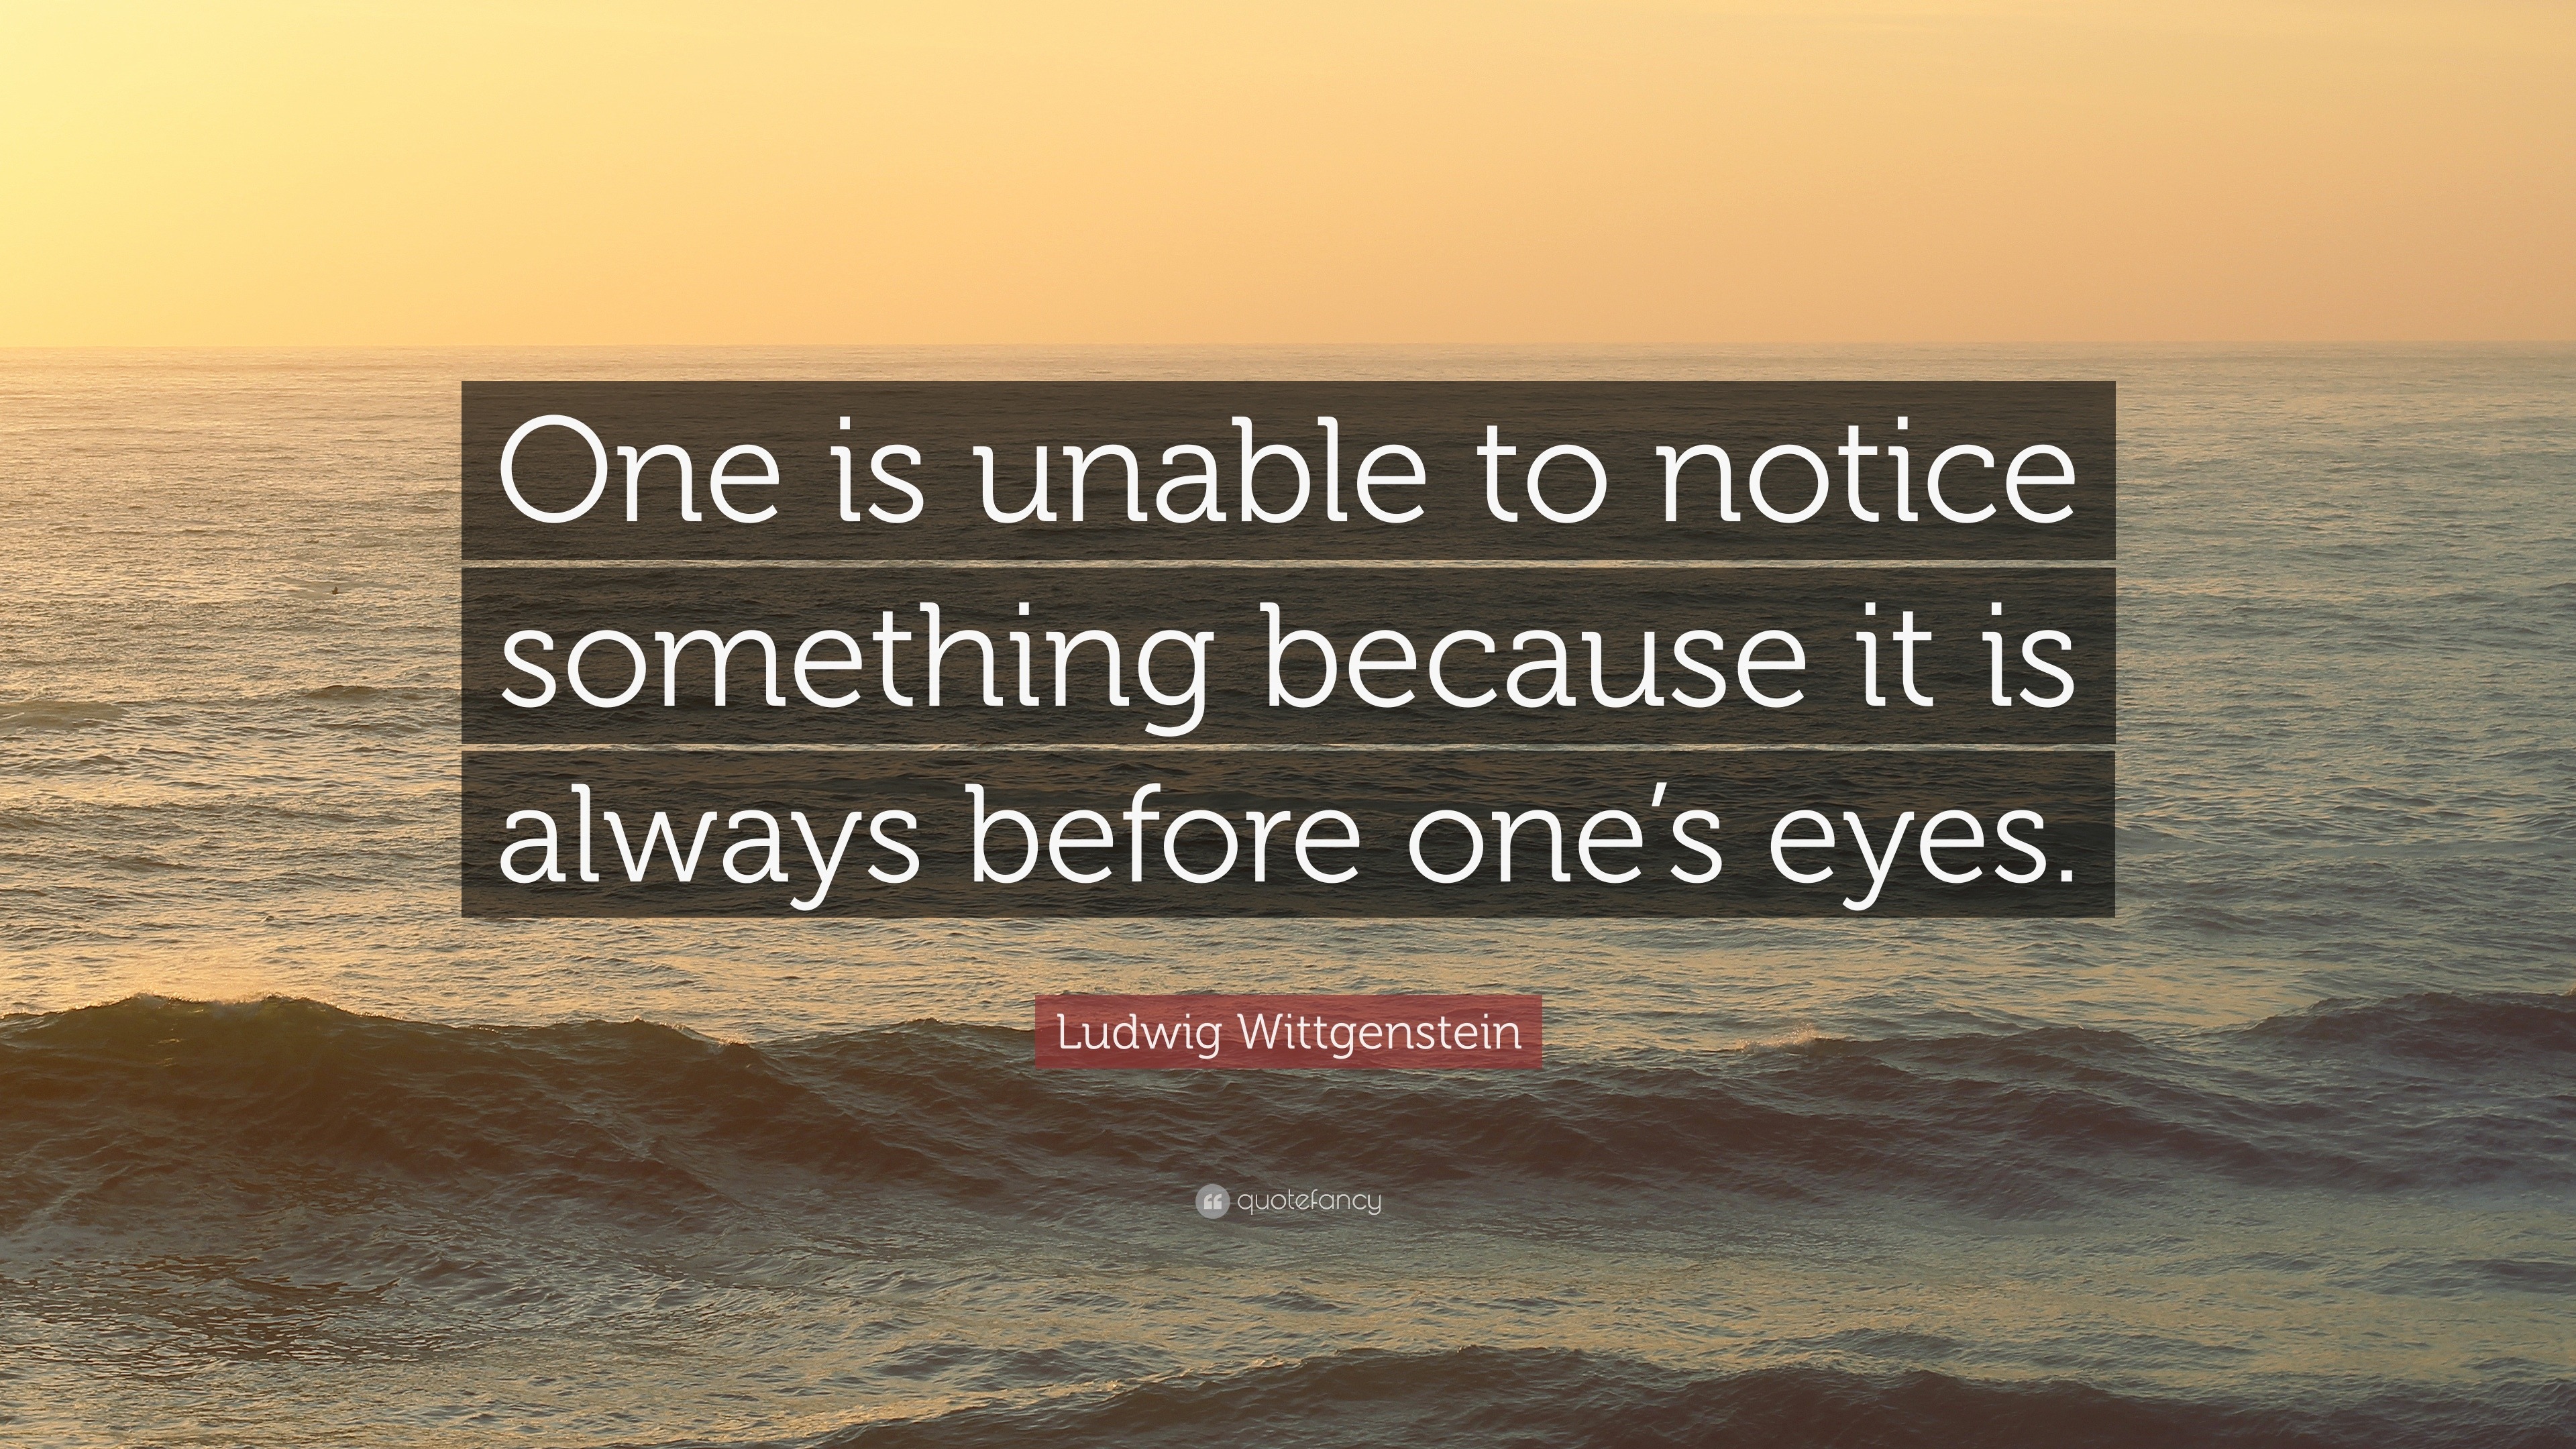 Ludwig Wittgenstein Quote: “One is unable to notice something because ...